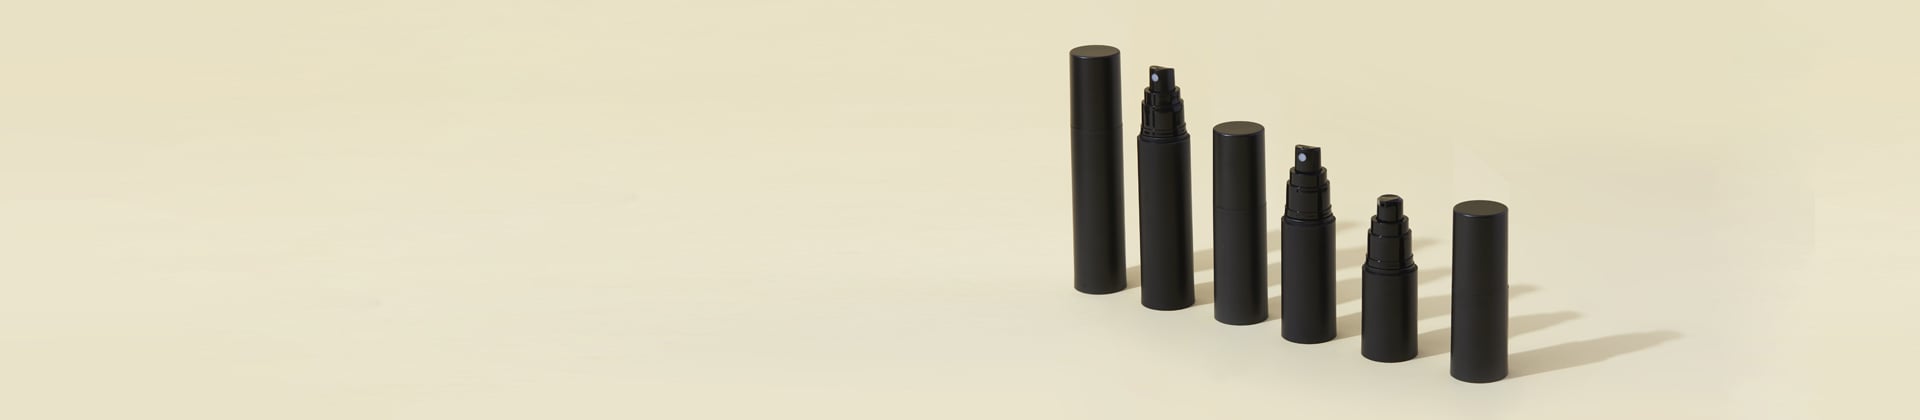 Black Matte PP Airless Serum and Spray Bottles with Cap